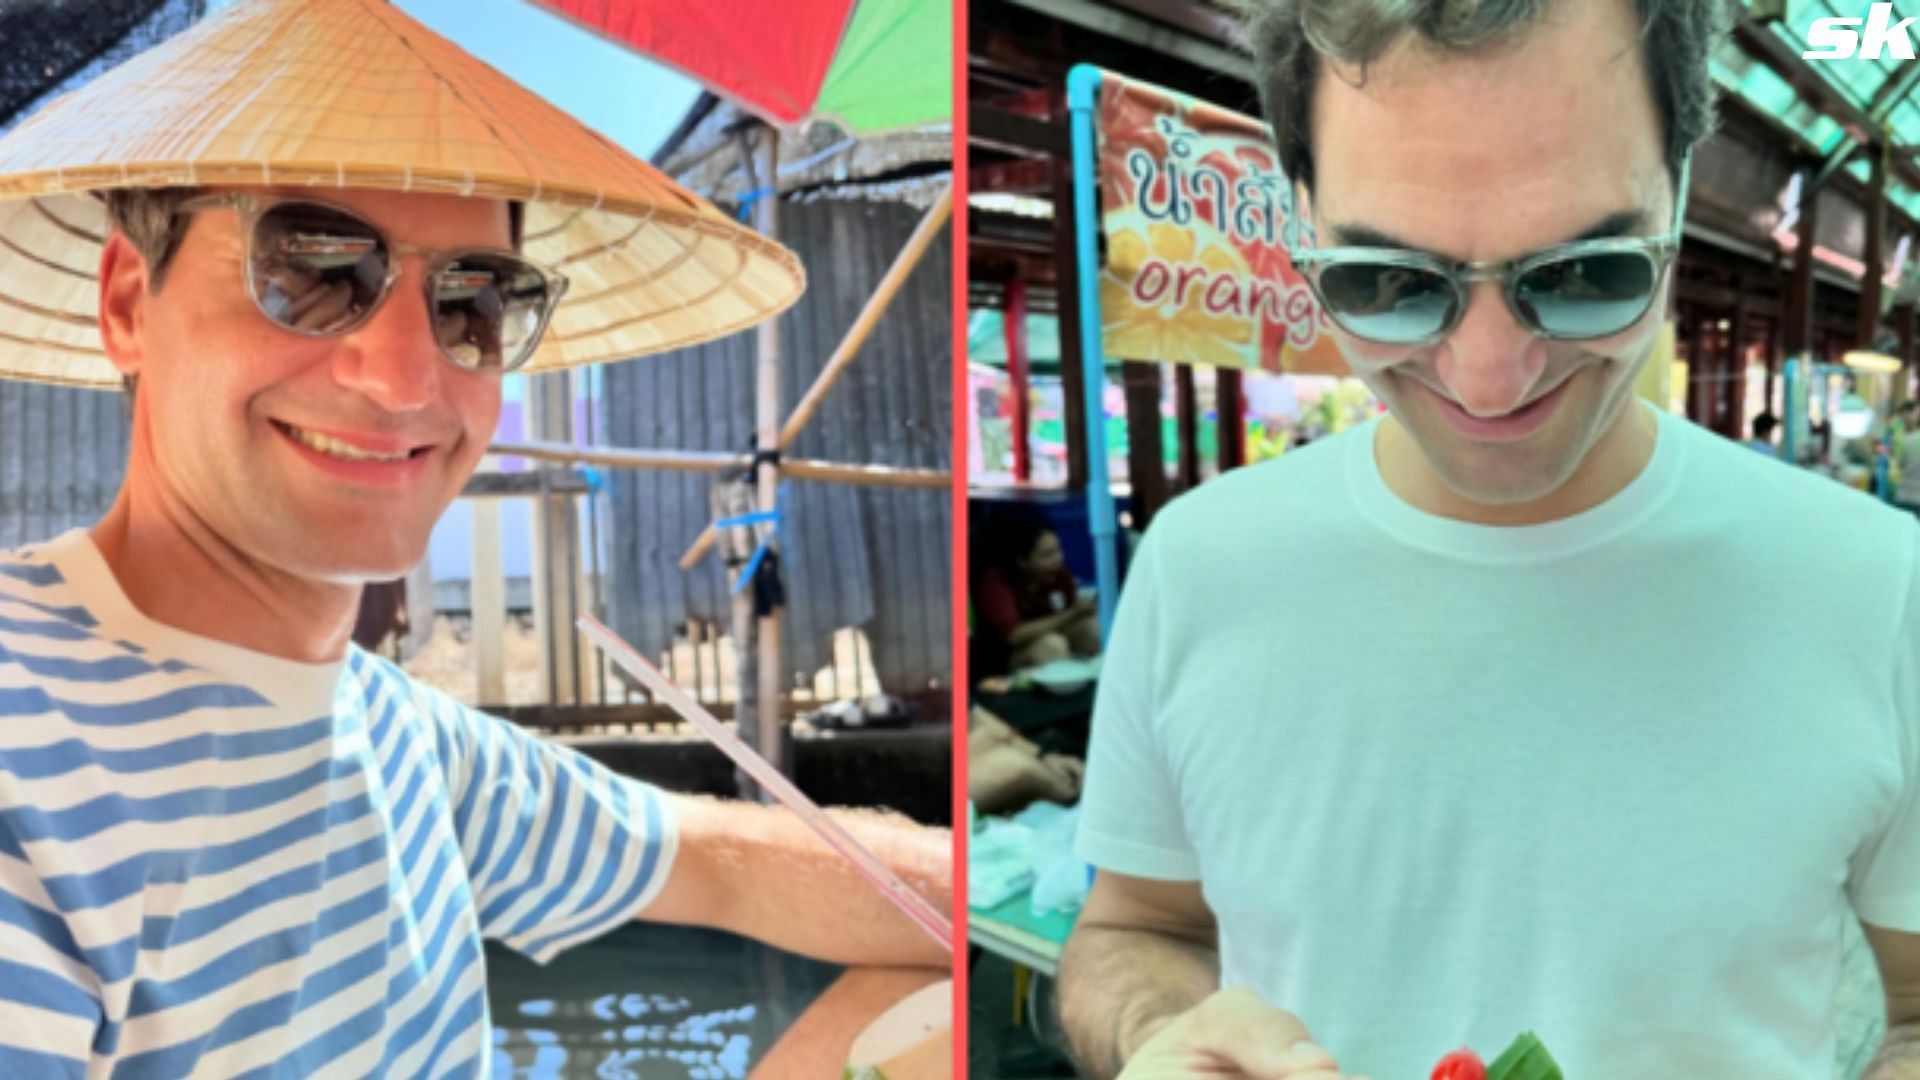 Roger Federer soaking in the local attractions during his vacation in Thailand